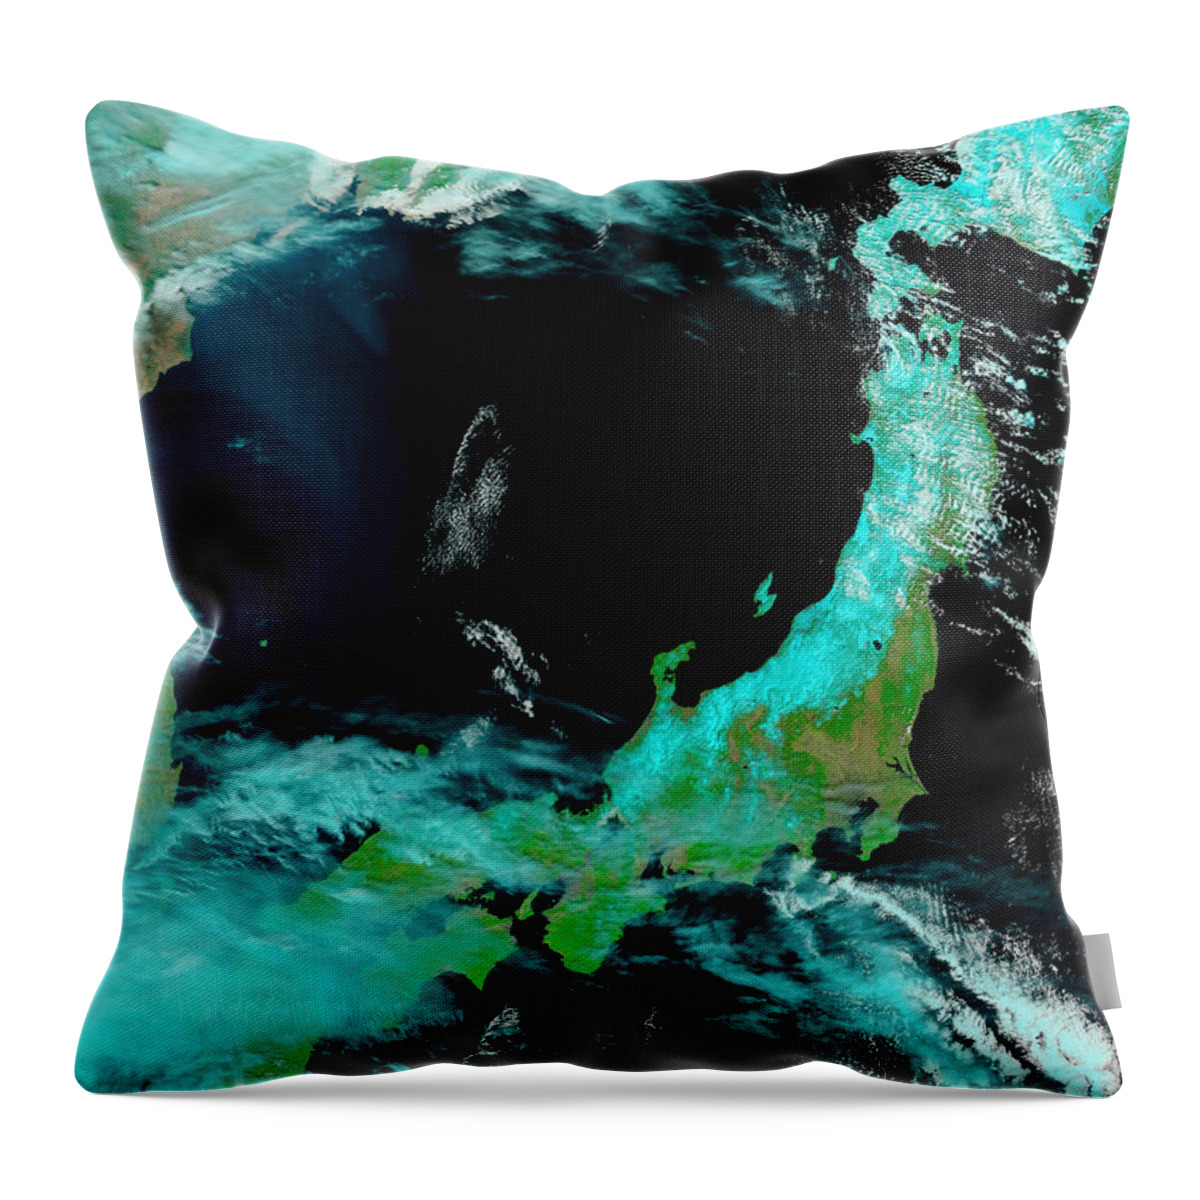 Japan Throw Pillow featuring the photograph Northeastern Japan After Tsunami by National Aeronautics and Space Administration